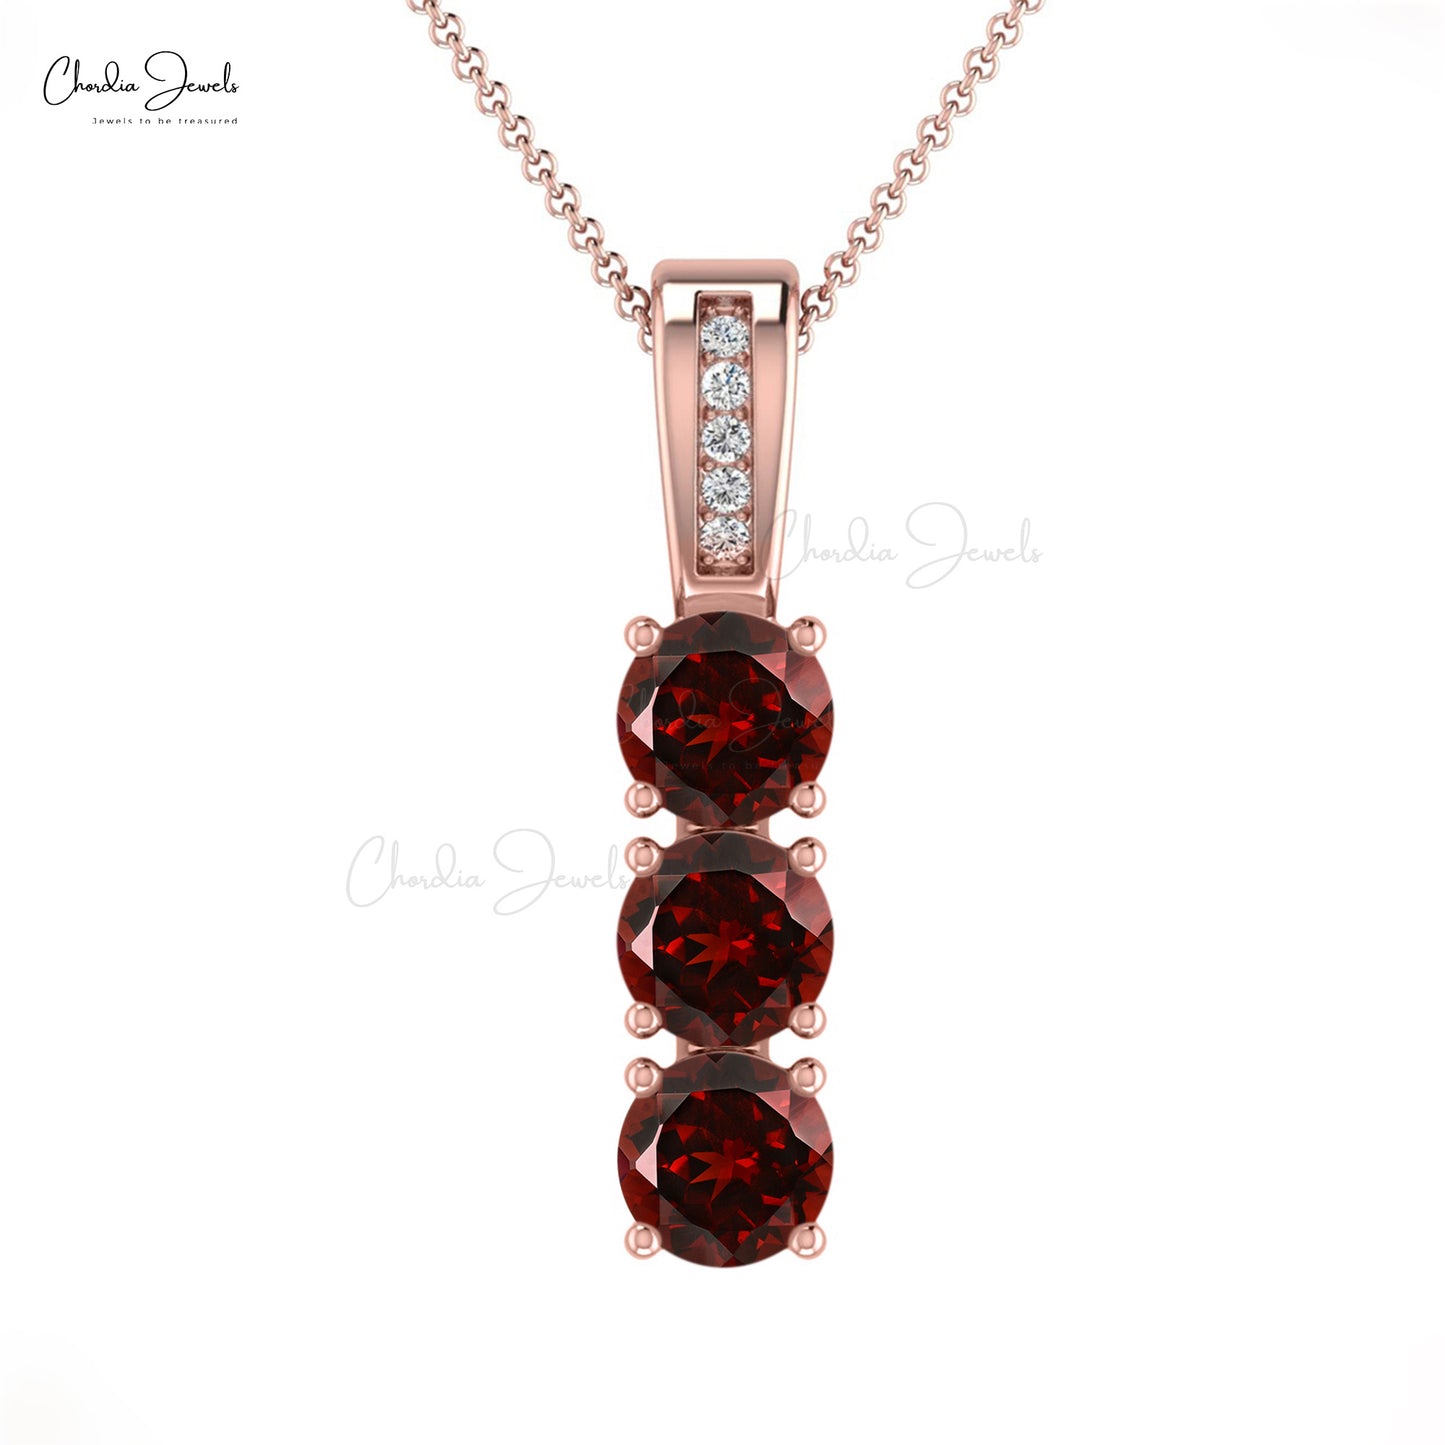 New Design Natural White Diamond Dangle Pendant Necklace 4mm Round Cut Red Garnet 3-Stone Pendant in 14k Solid Gold Jewelry For Women